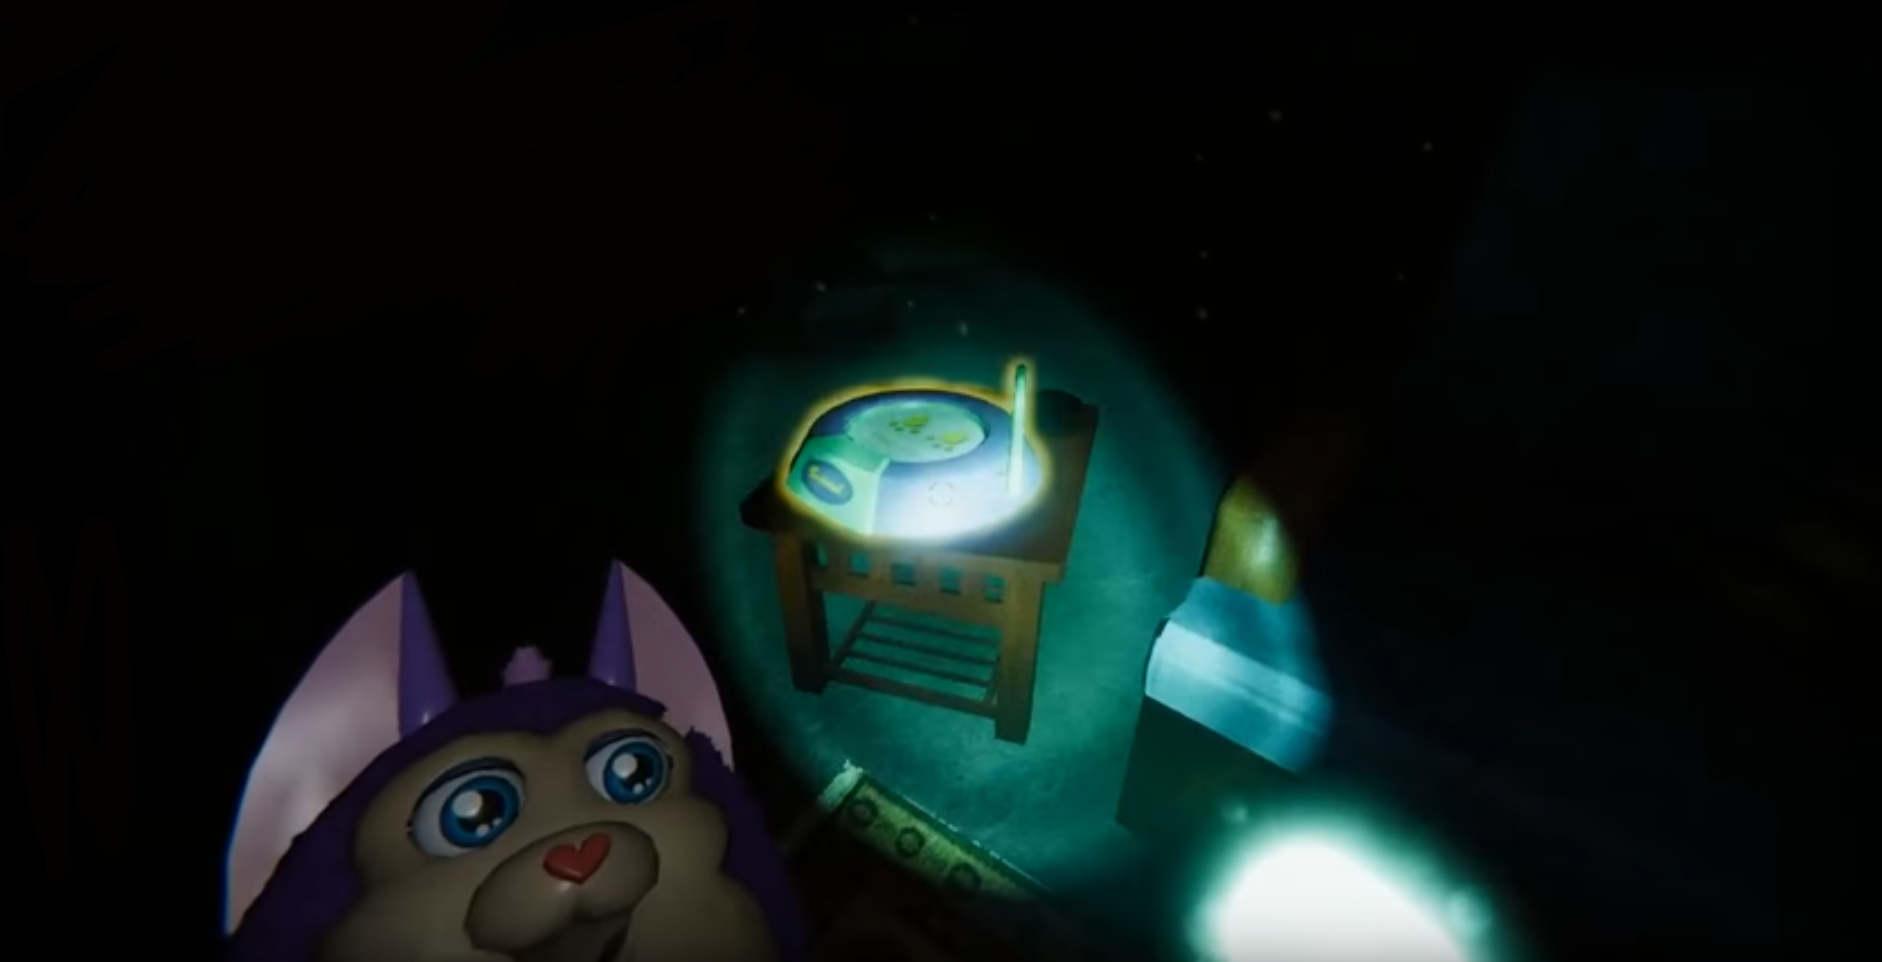 Planned All Along: Quick Review: Tattletail